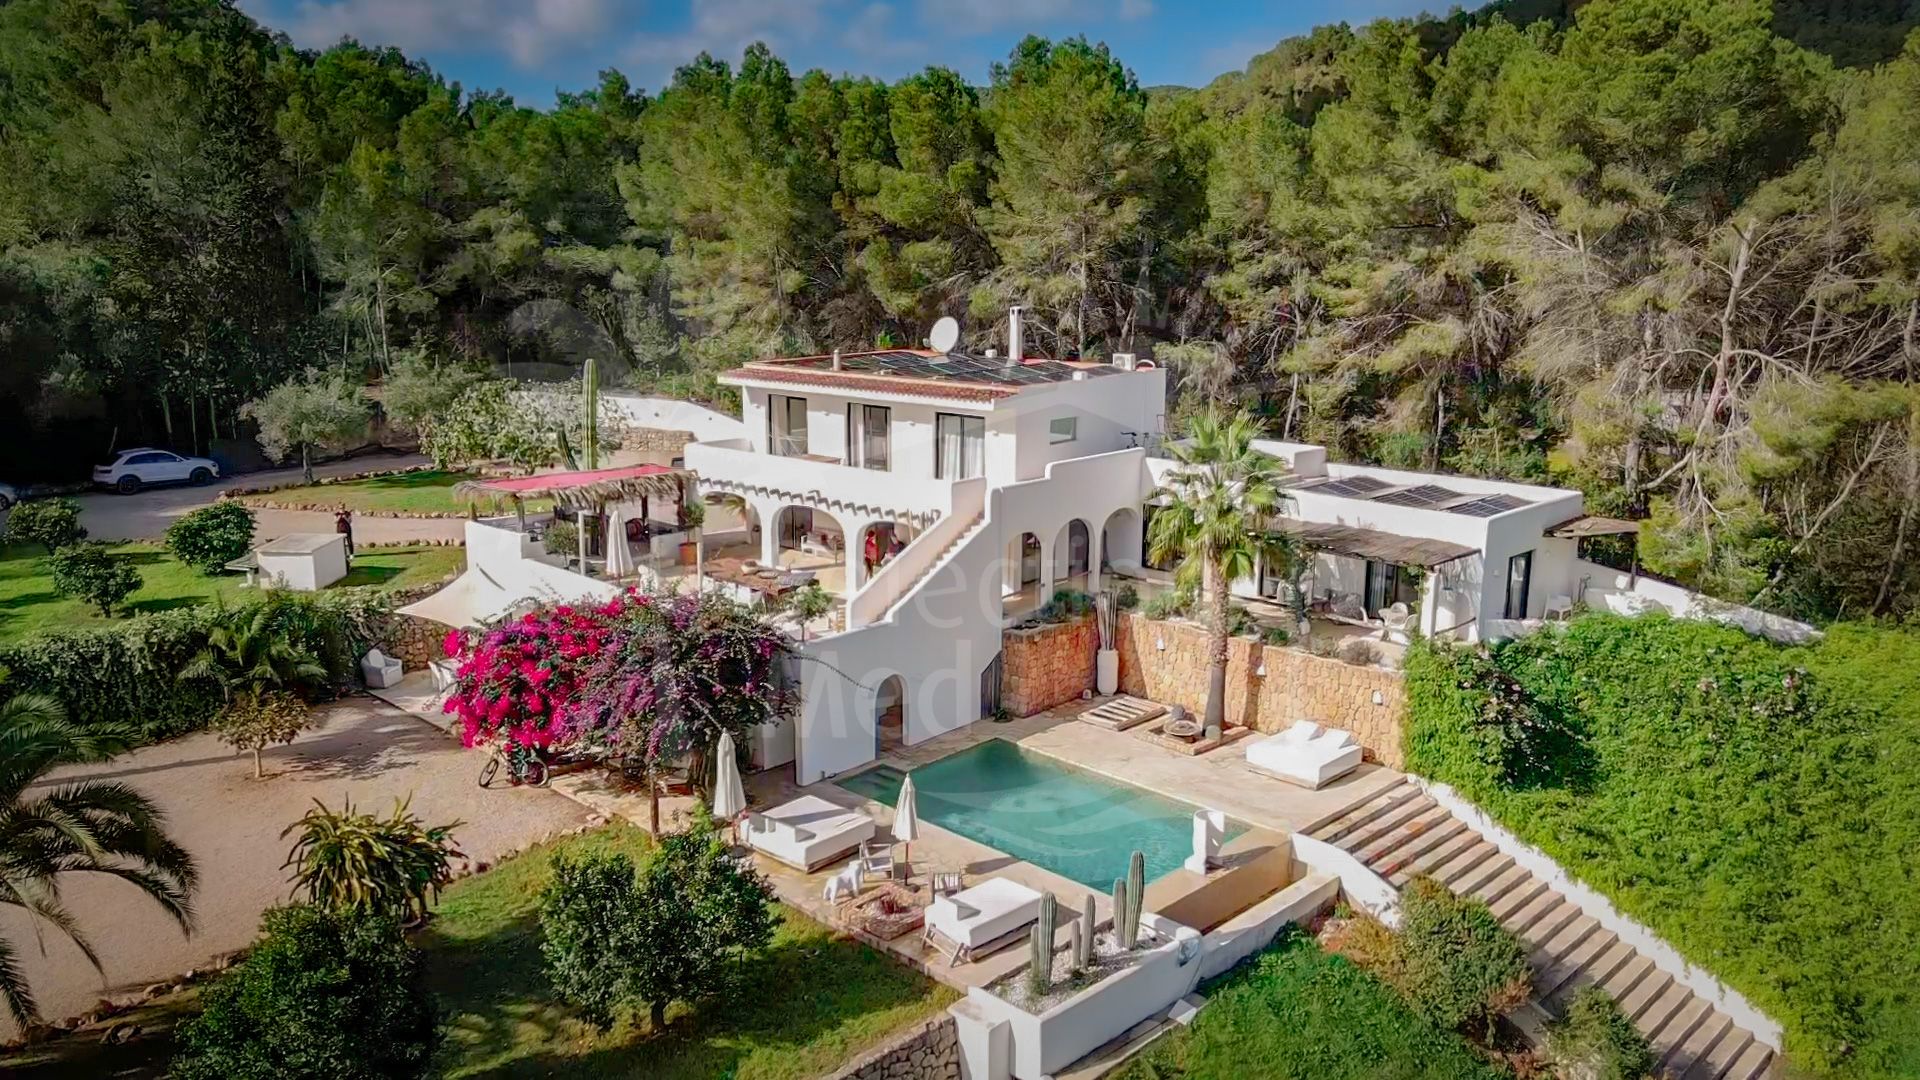 Beautiful country villa located in a small valley near San Miguel